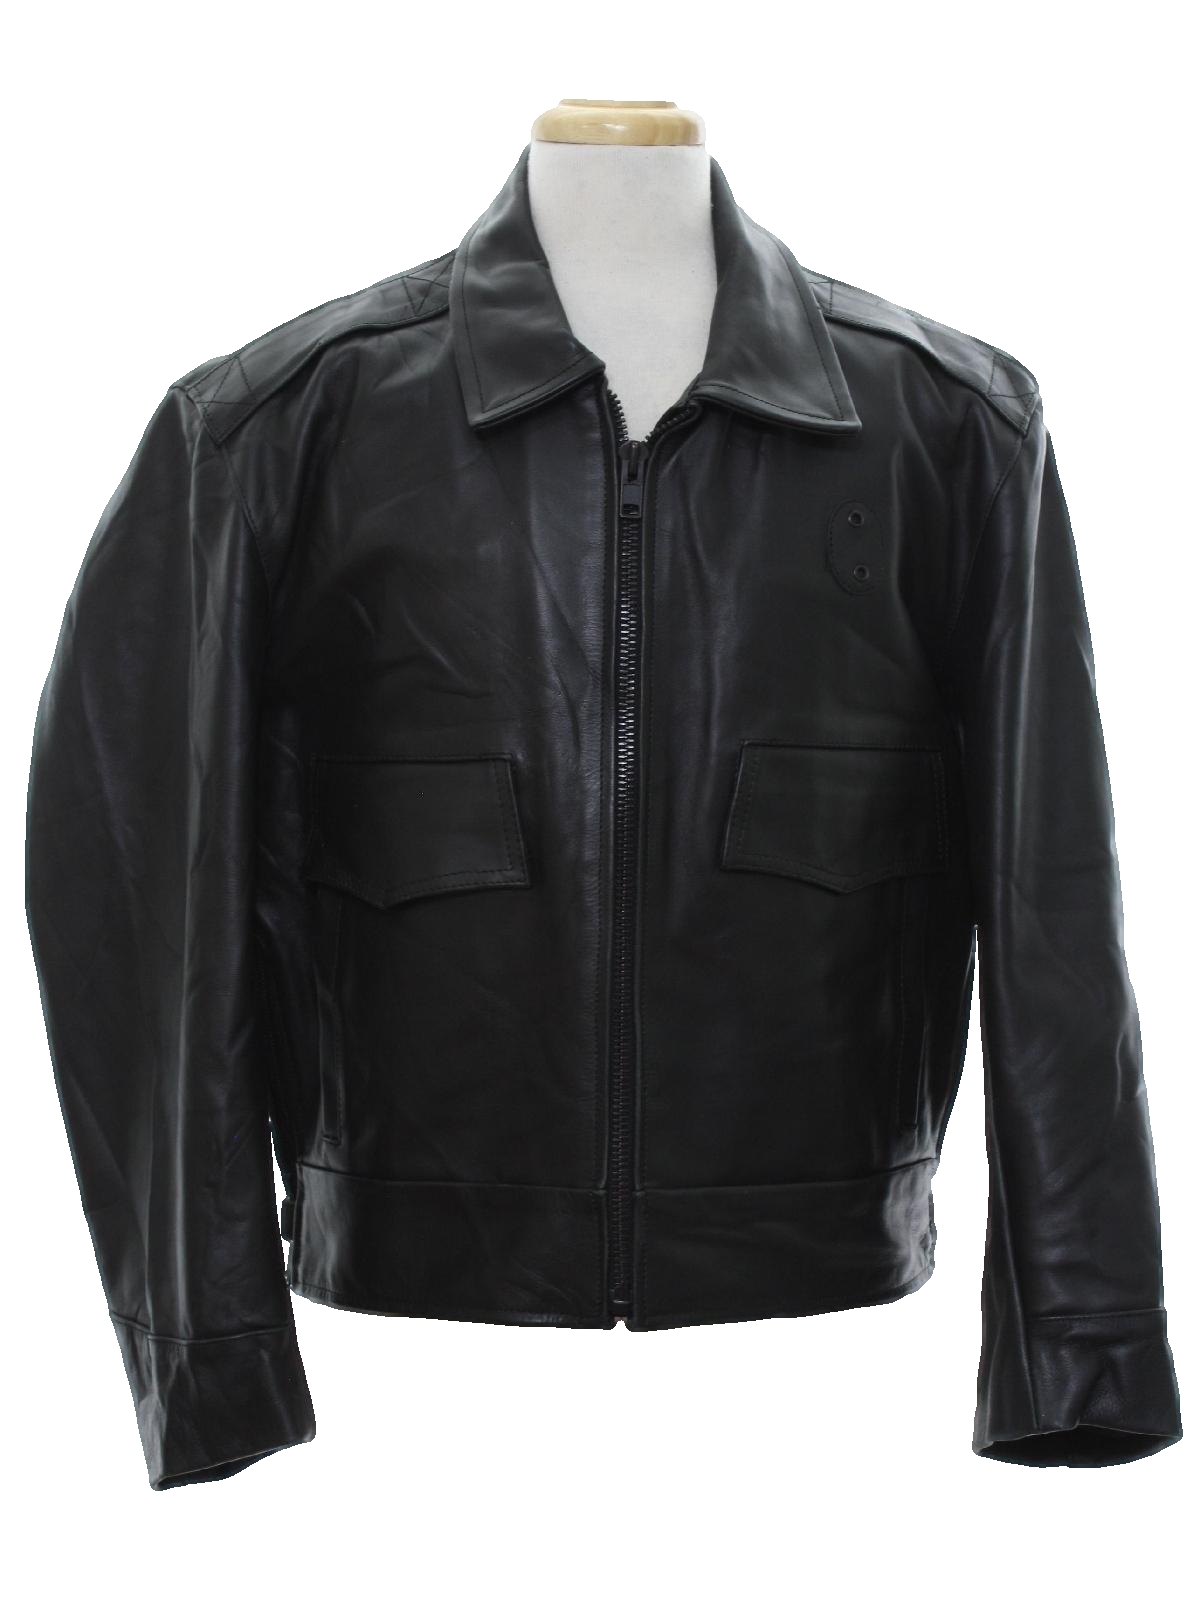 1980's Vintage Appalachian Leather Works Leather Jacket: Late 80s or ...